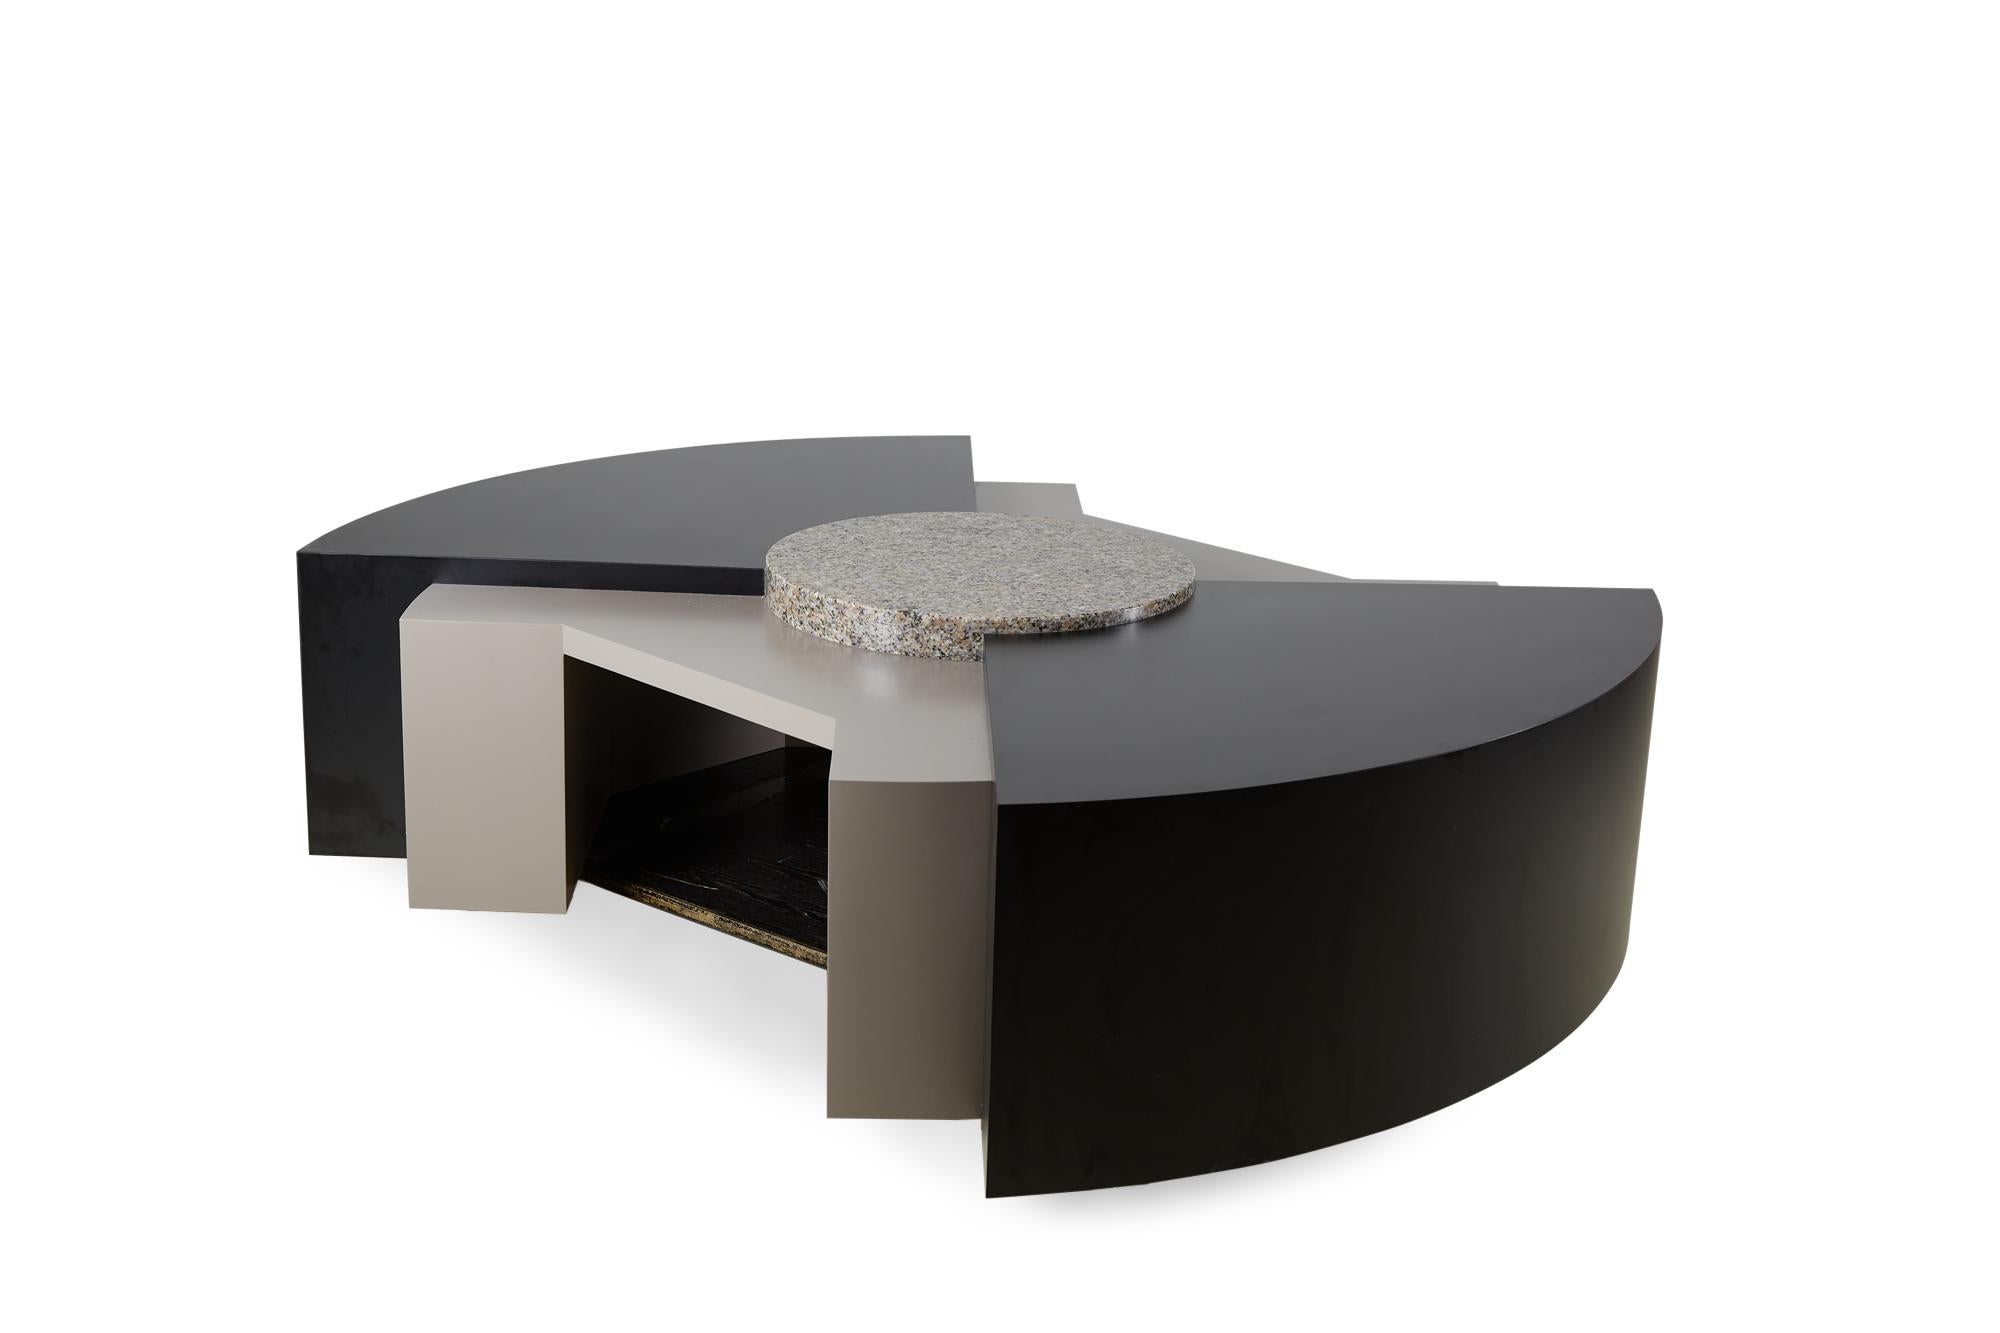 American Post-Modern (circa 1980s) custom coffee / cocktail table with a tiered architectural structure in black and gray mica laminate with a central granite disk. (STANLEY TIGERMAN AND MARGARET MCCURRY)